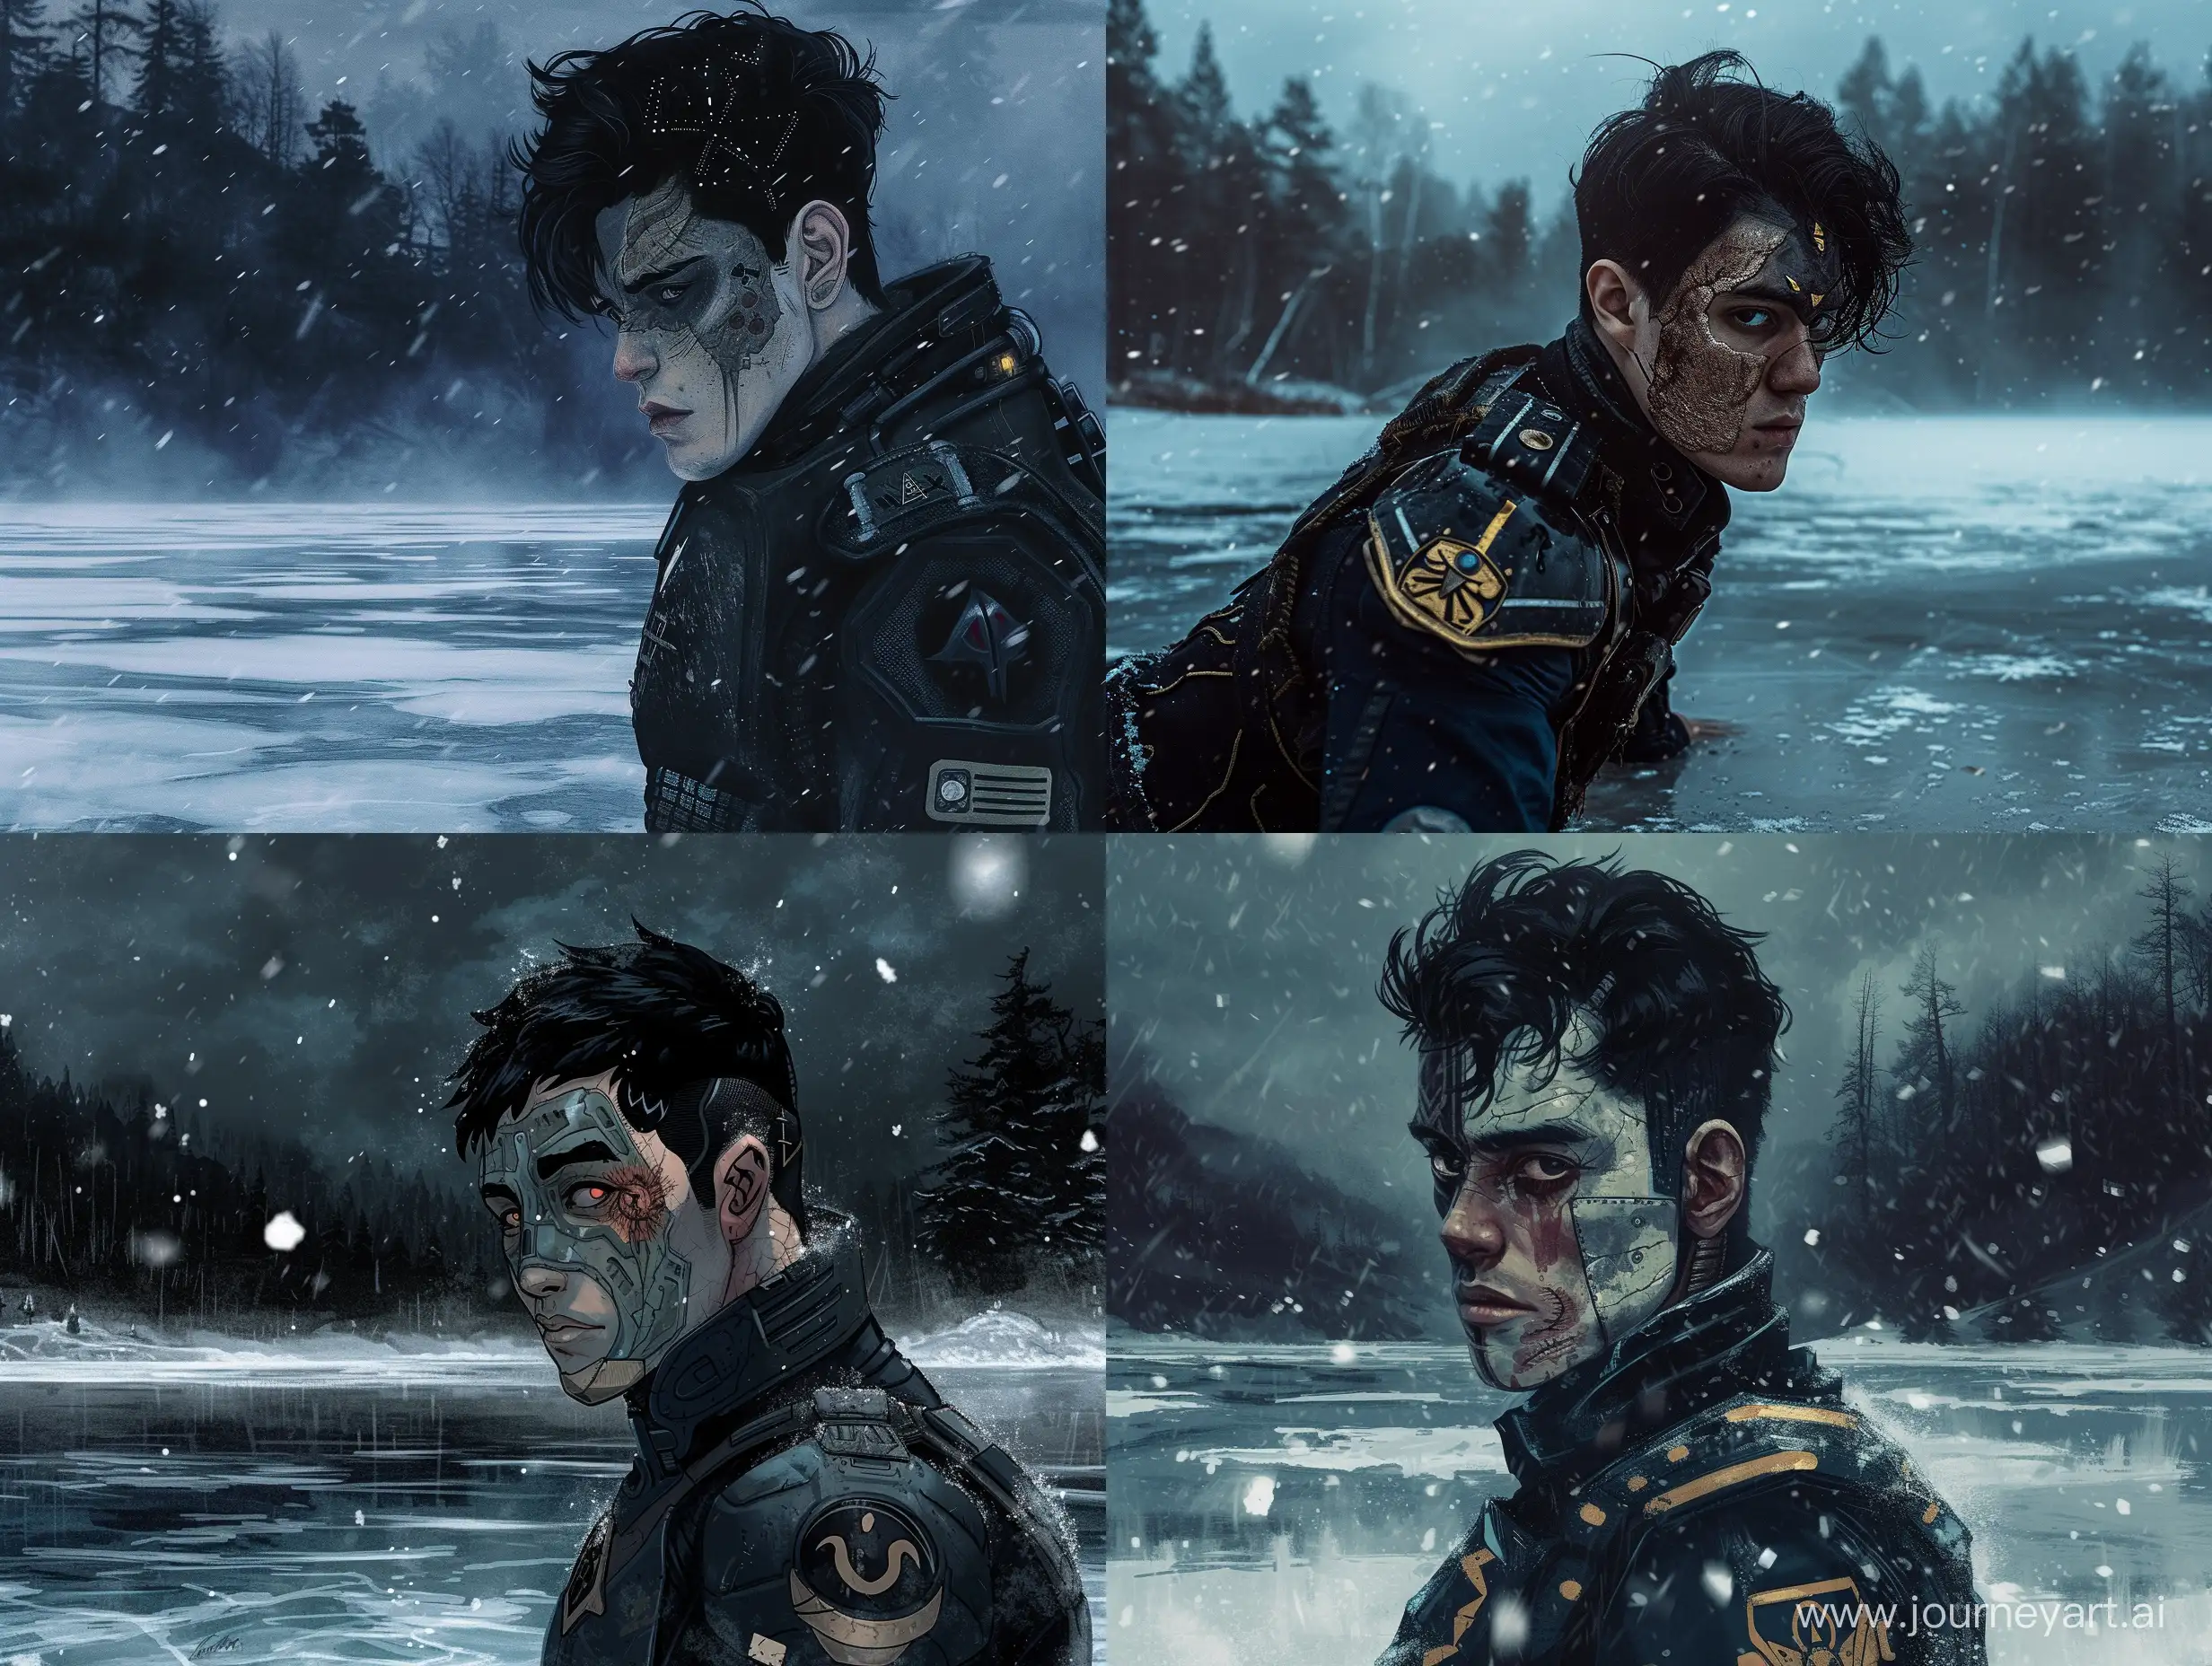  man with black hair, scar on face, sci fi uniform, half ancient mask on face,  , on an icy lake, dark forest in the background, snowstorm,  comics manga style